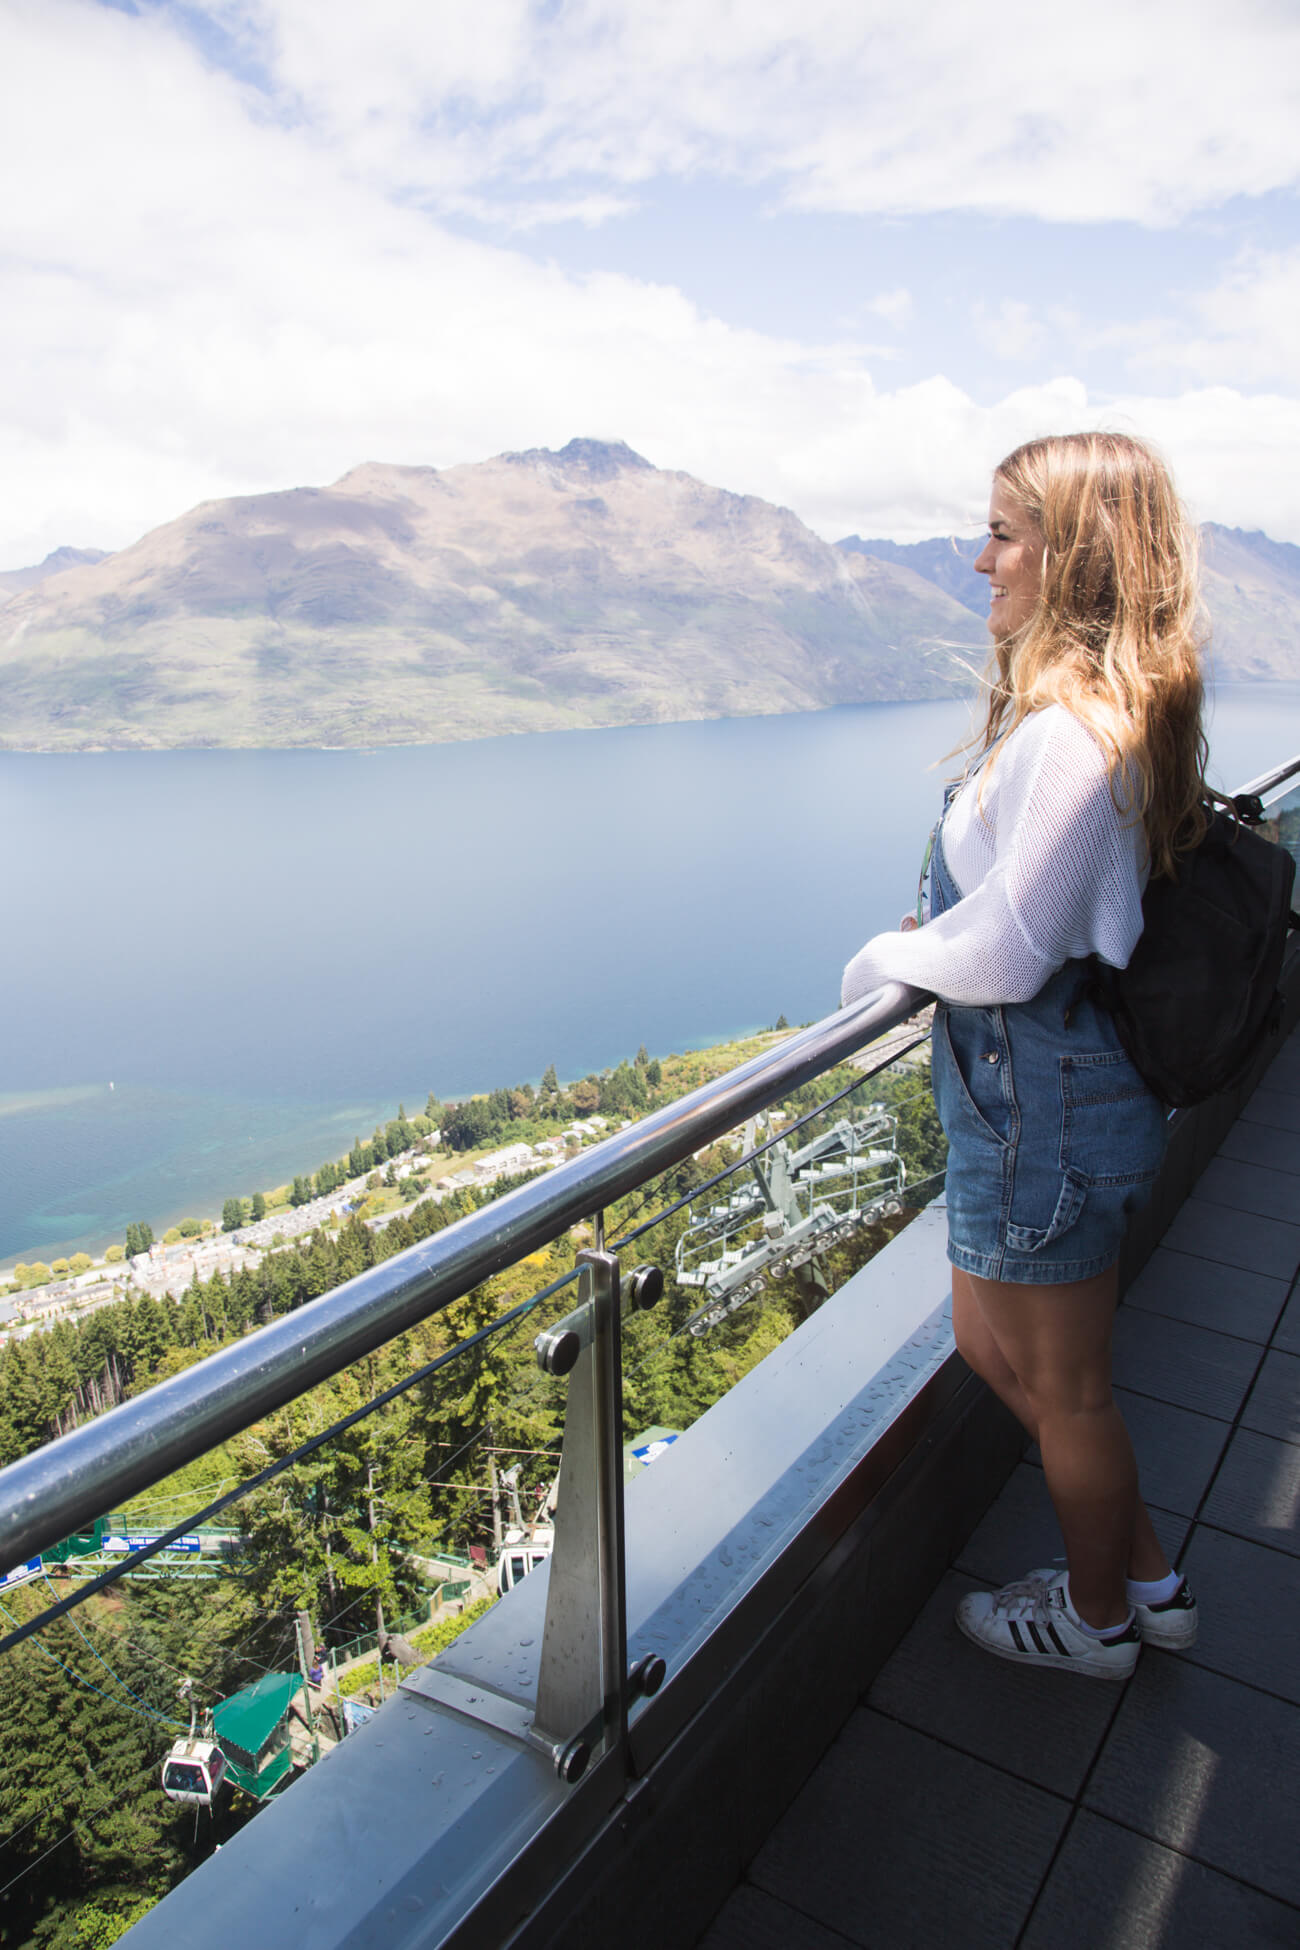 A backpackers guide to Queenstown, New Zealand